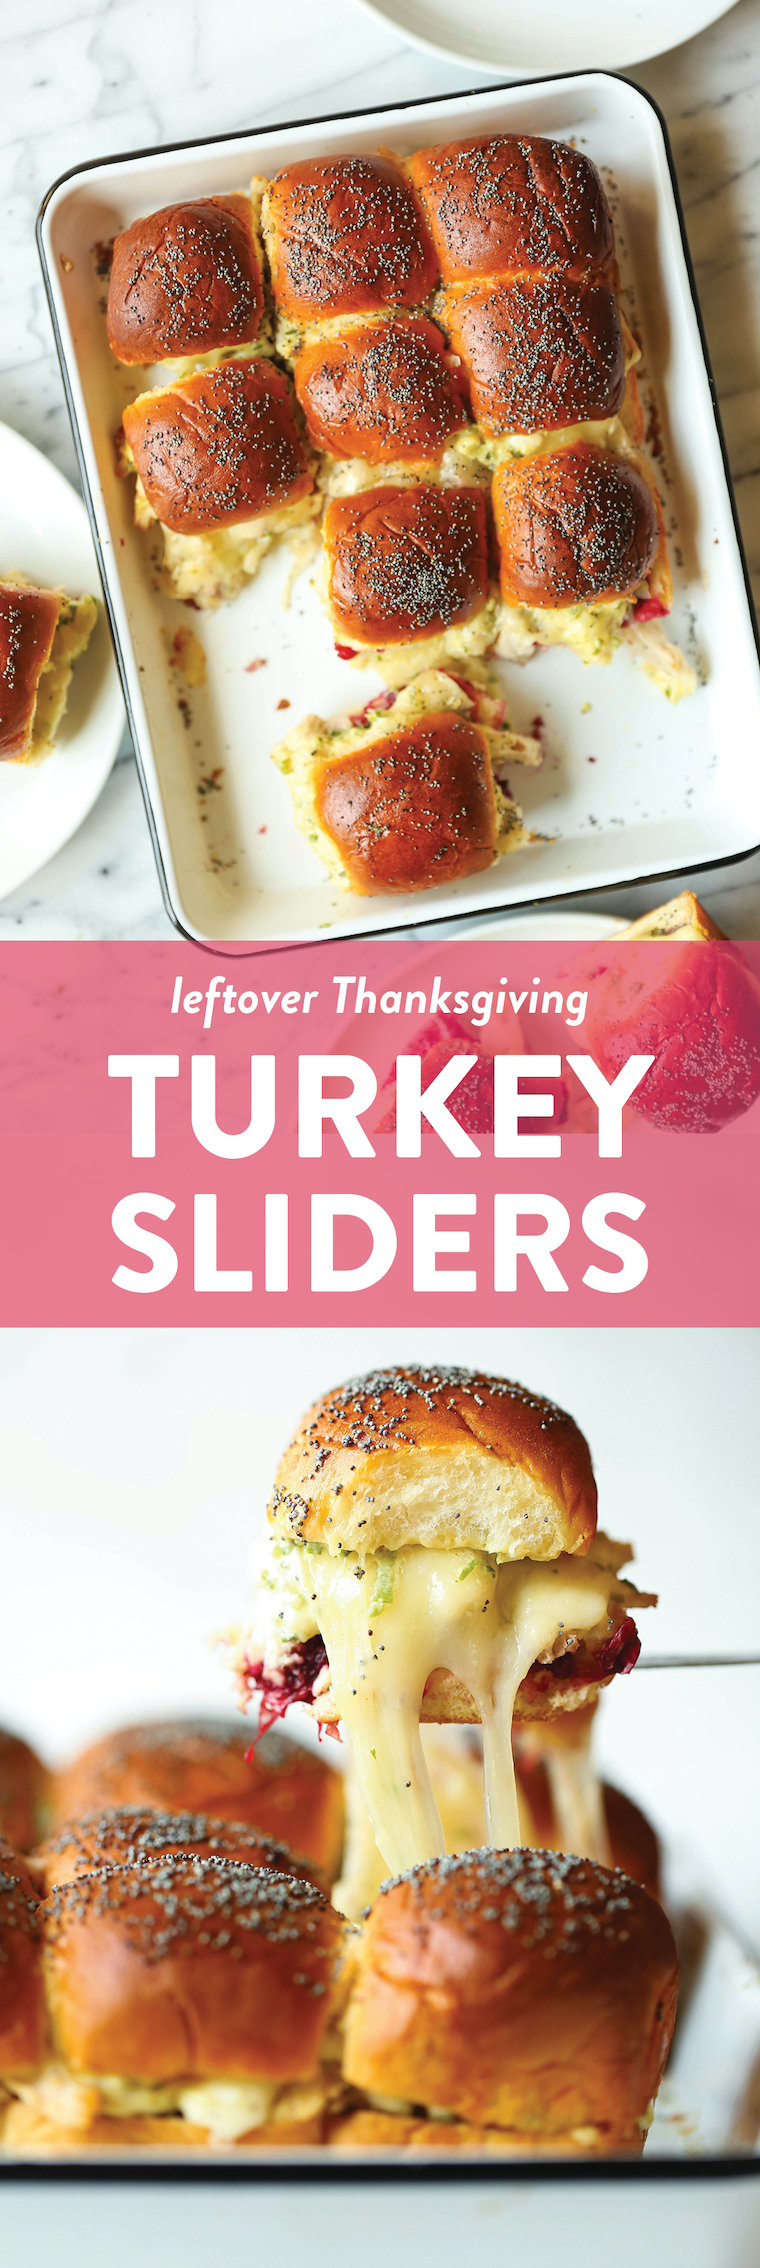 Leftover Thanksgiving Sliders - Leftover turkey, cranberry sauce, Dijon and melted cheese on super buttery Hawaiian rolls. Bake and serve warm! SO SO GOOD.